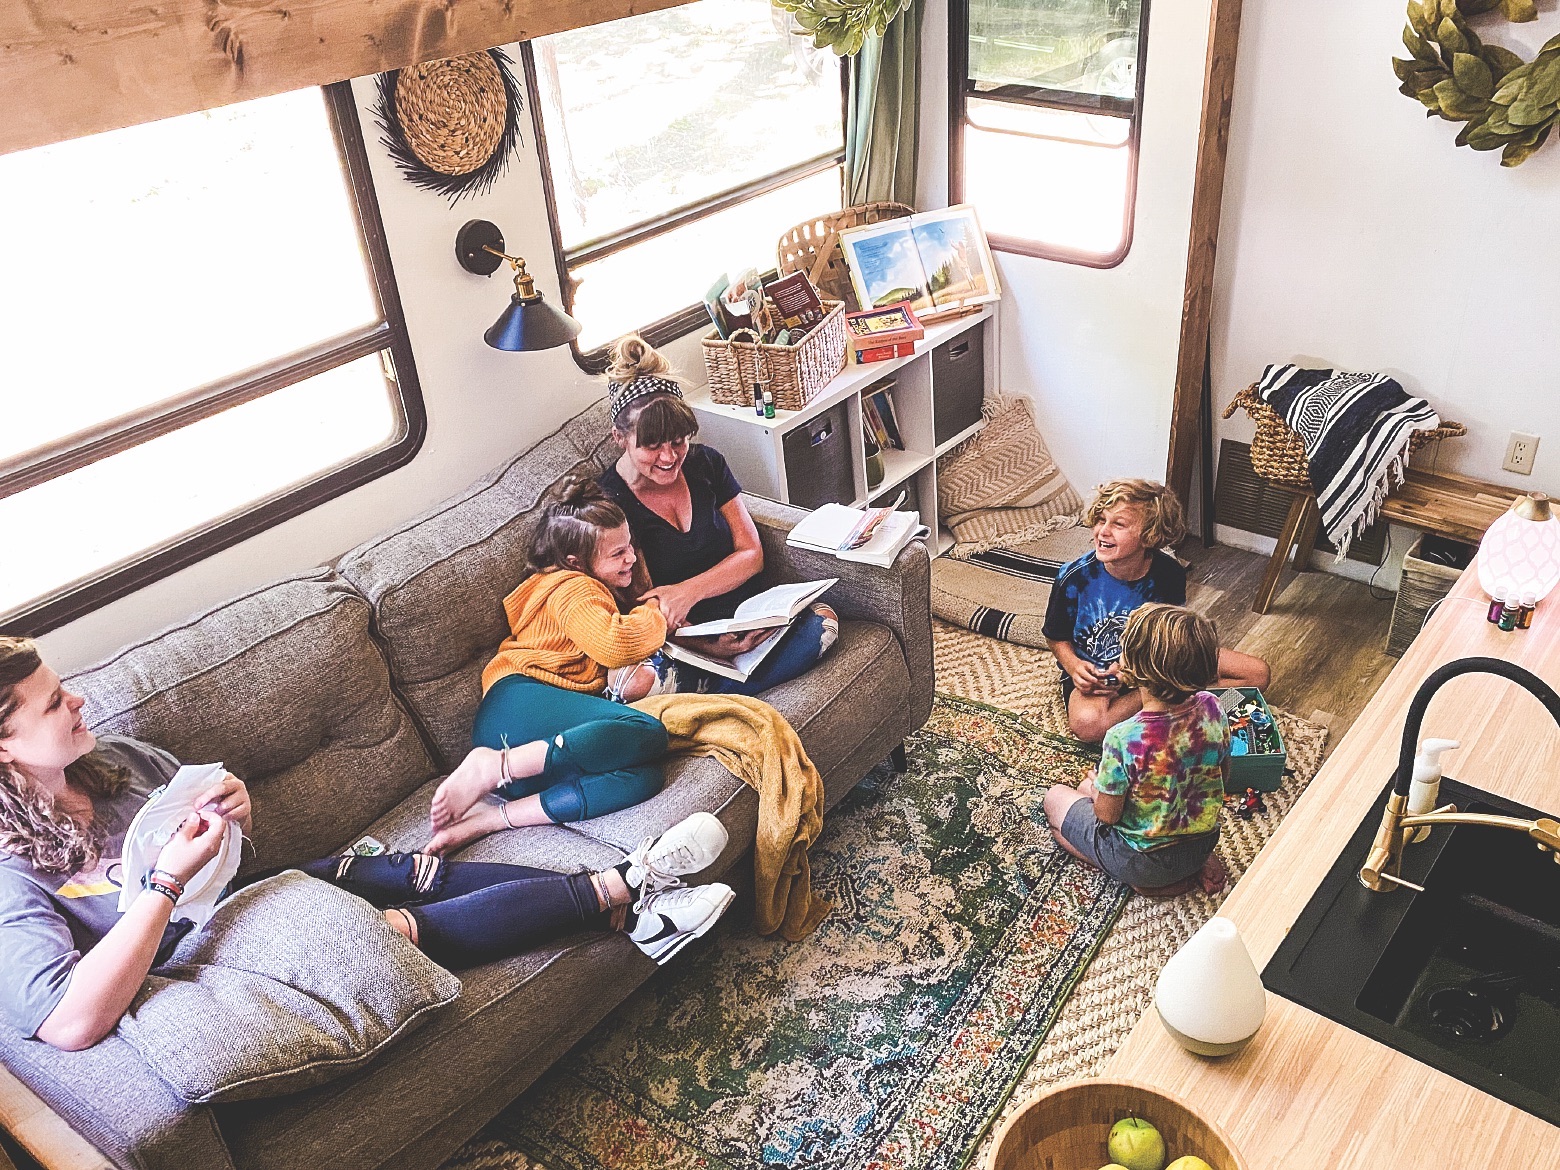 Lane Less Traveled family learning on the road in their remodeled RV